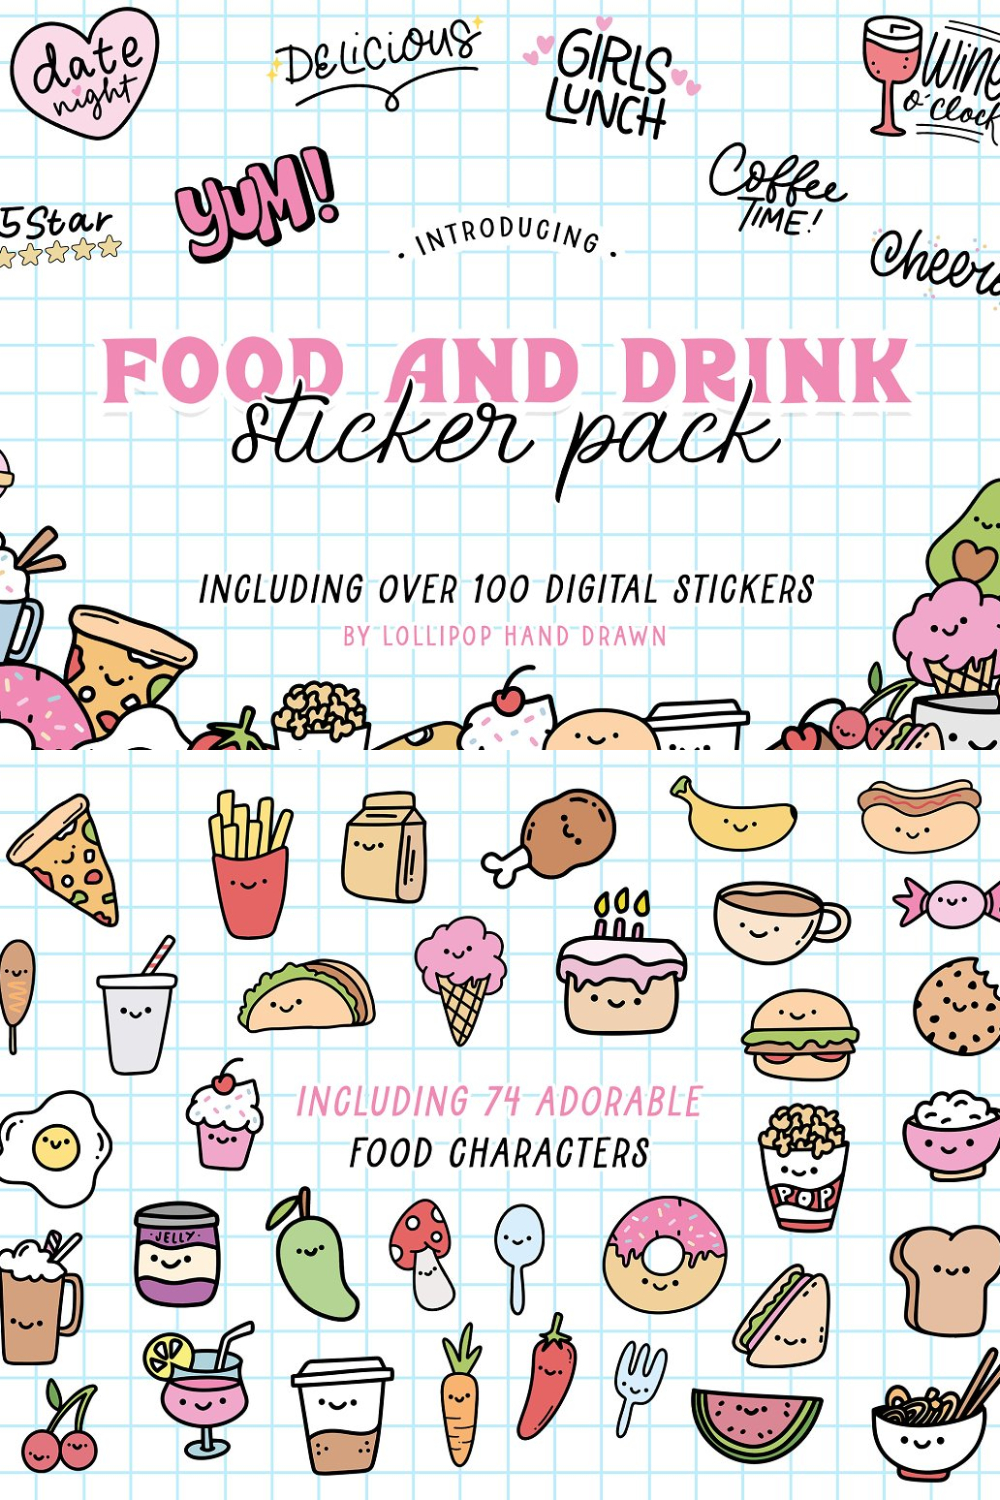 Food And Drink Sticker Pack - Pinterest.